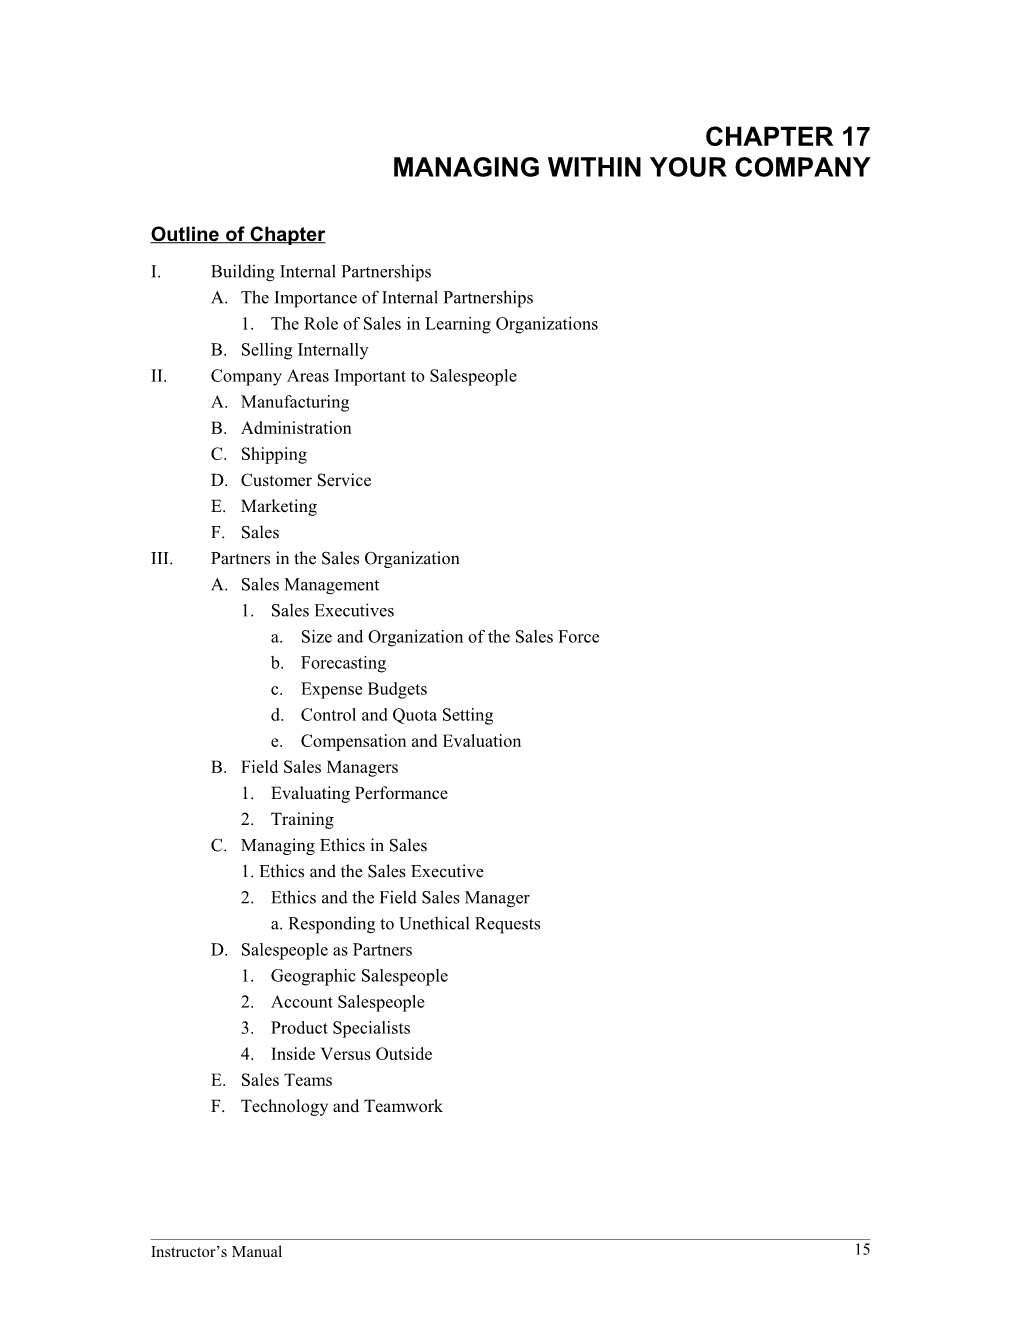 Managing Within Your Company